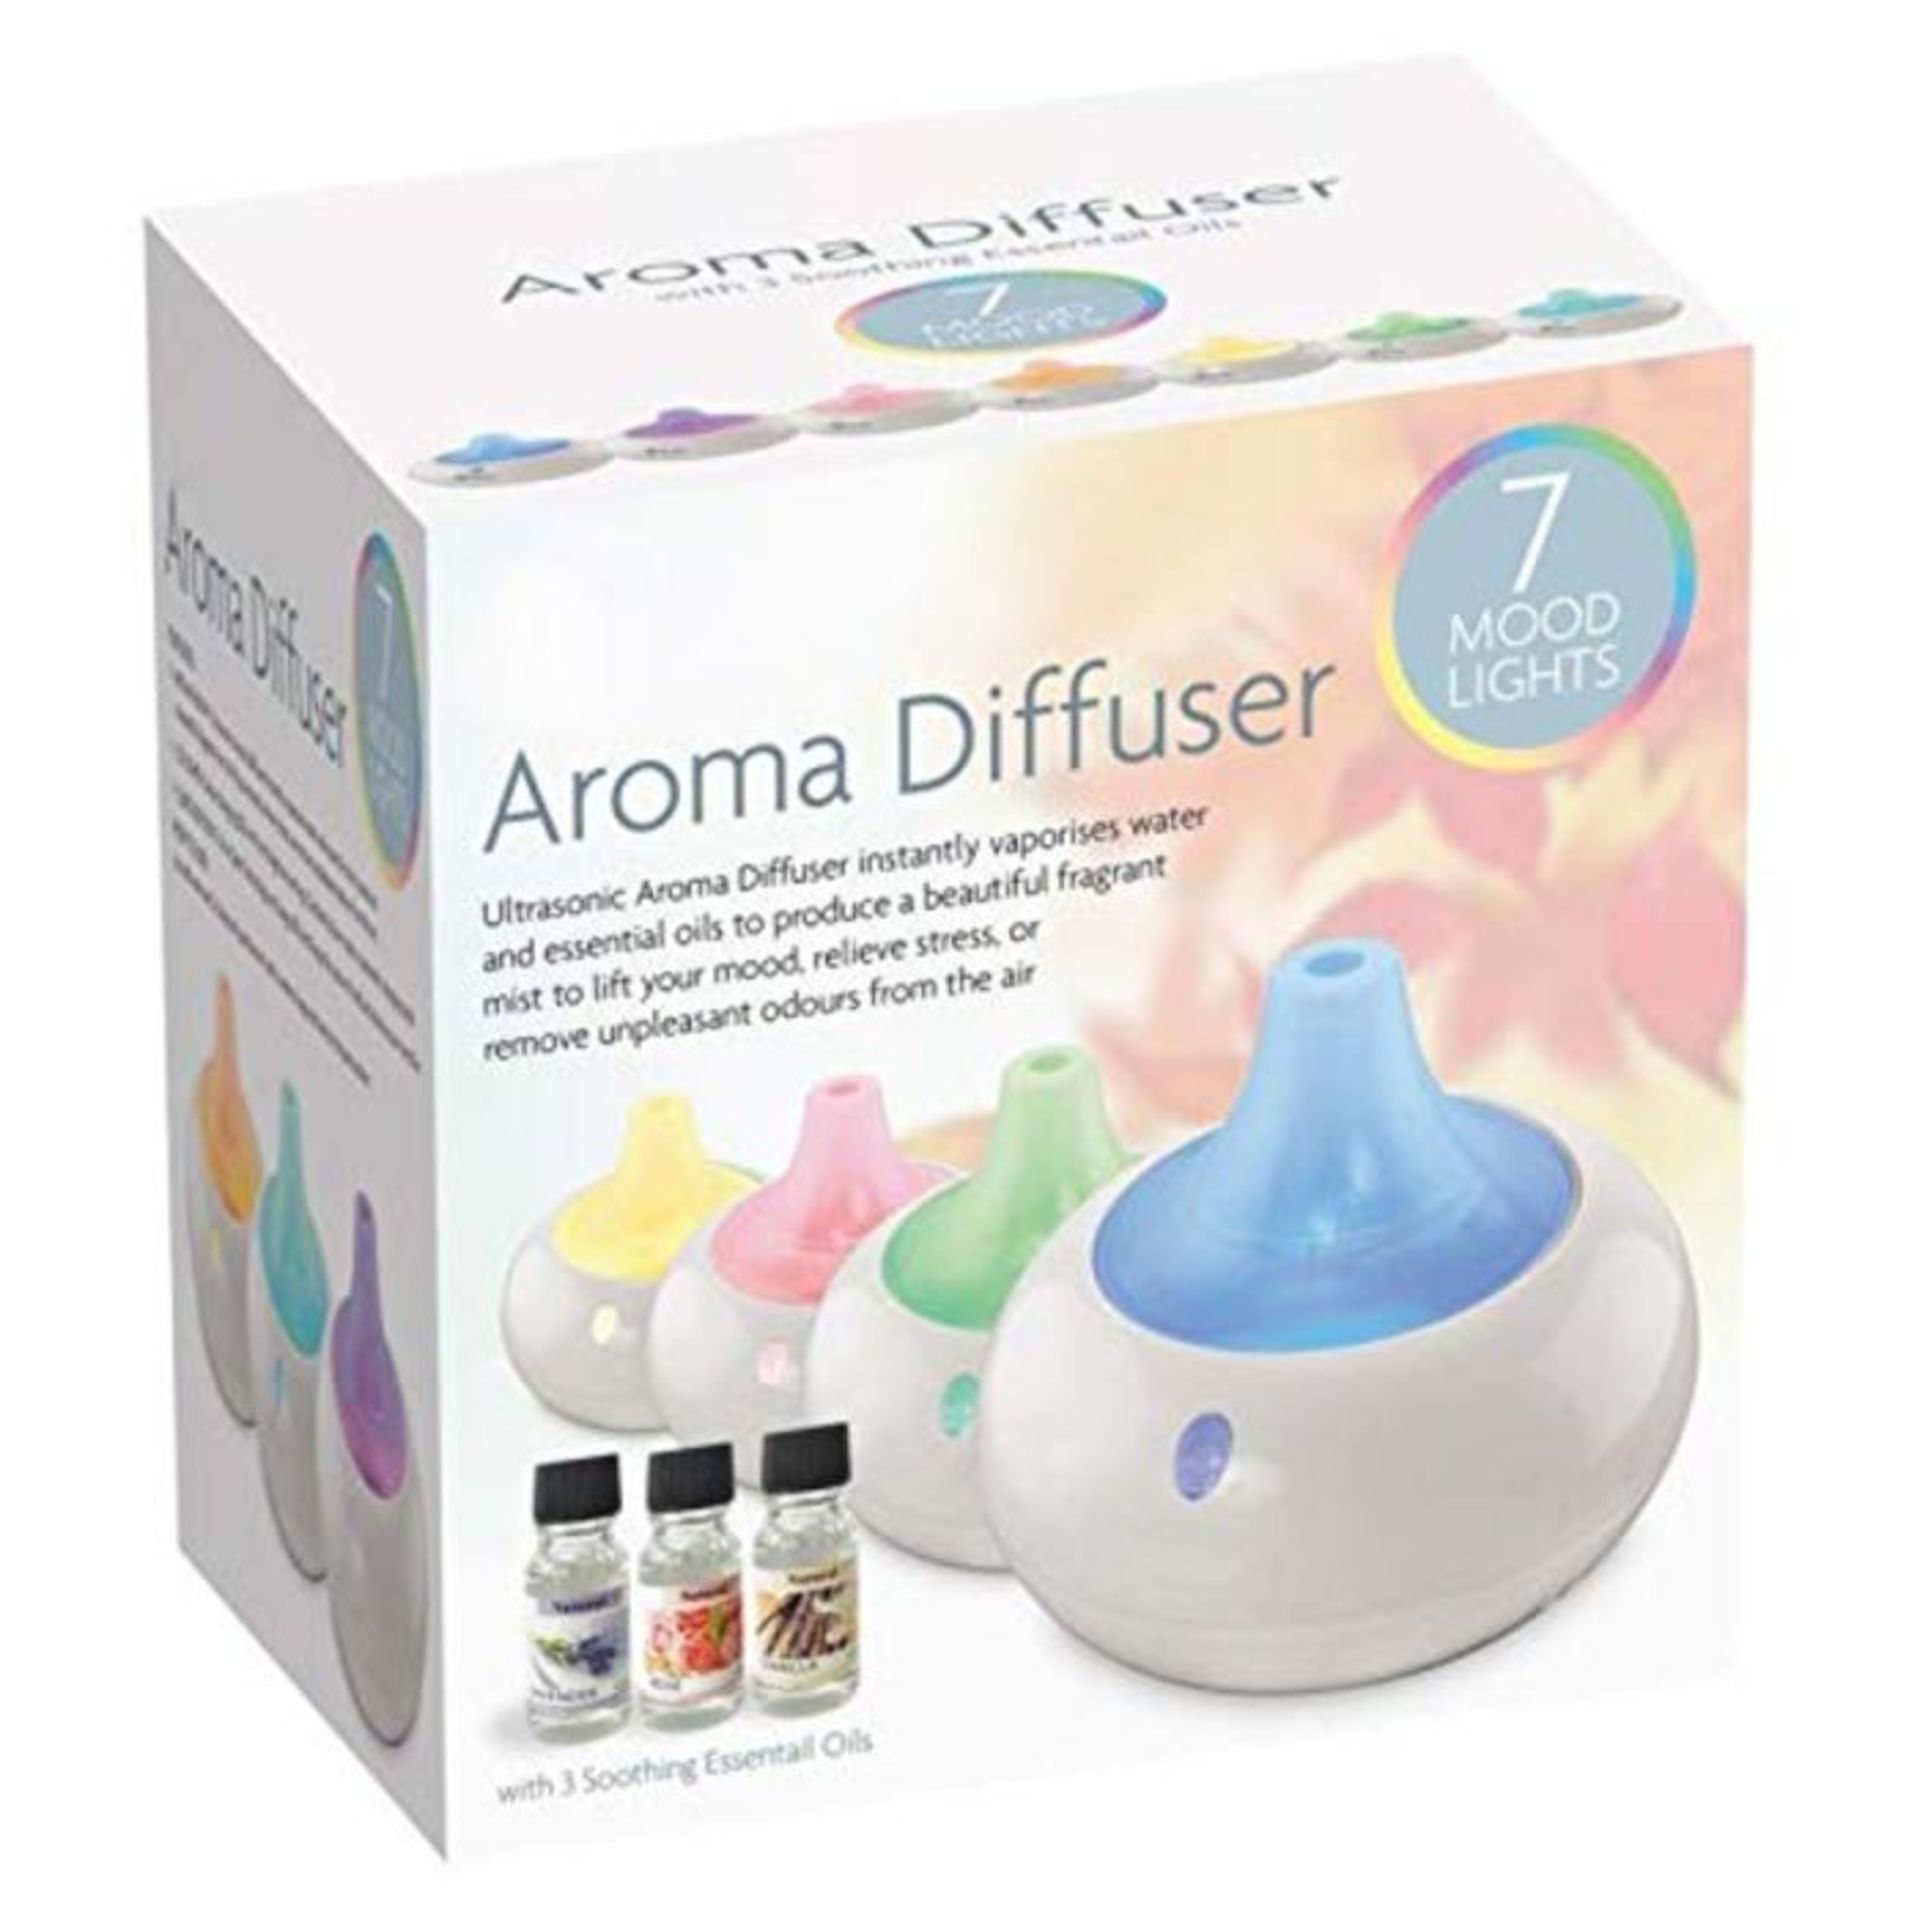 Airess Ultrasonic Aroma Diffuser Humidifier Essential Oils With 7 Colour LED Mood Ligh